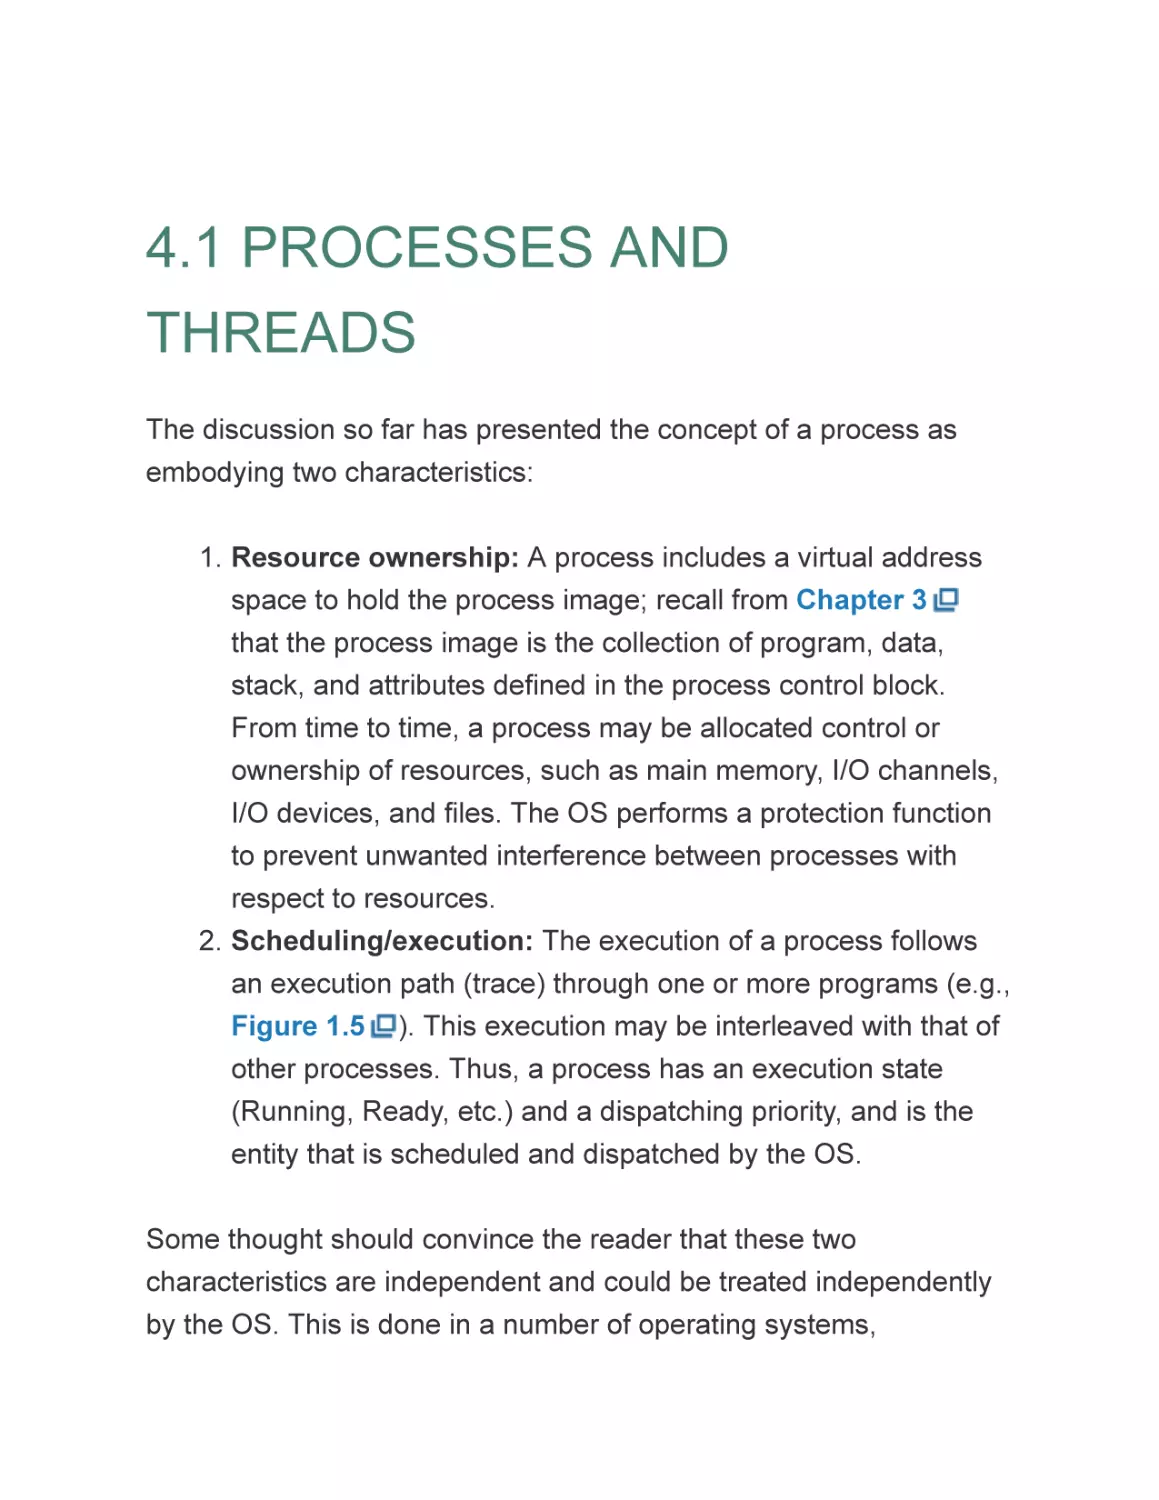 4.1 PROCESSES AND THREADS